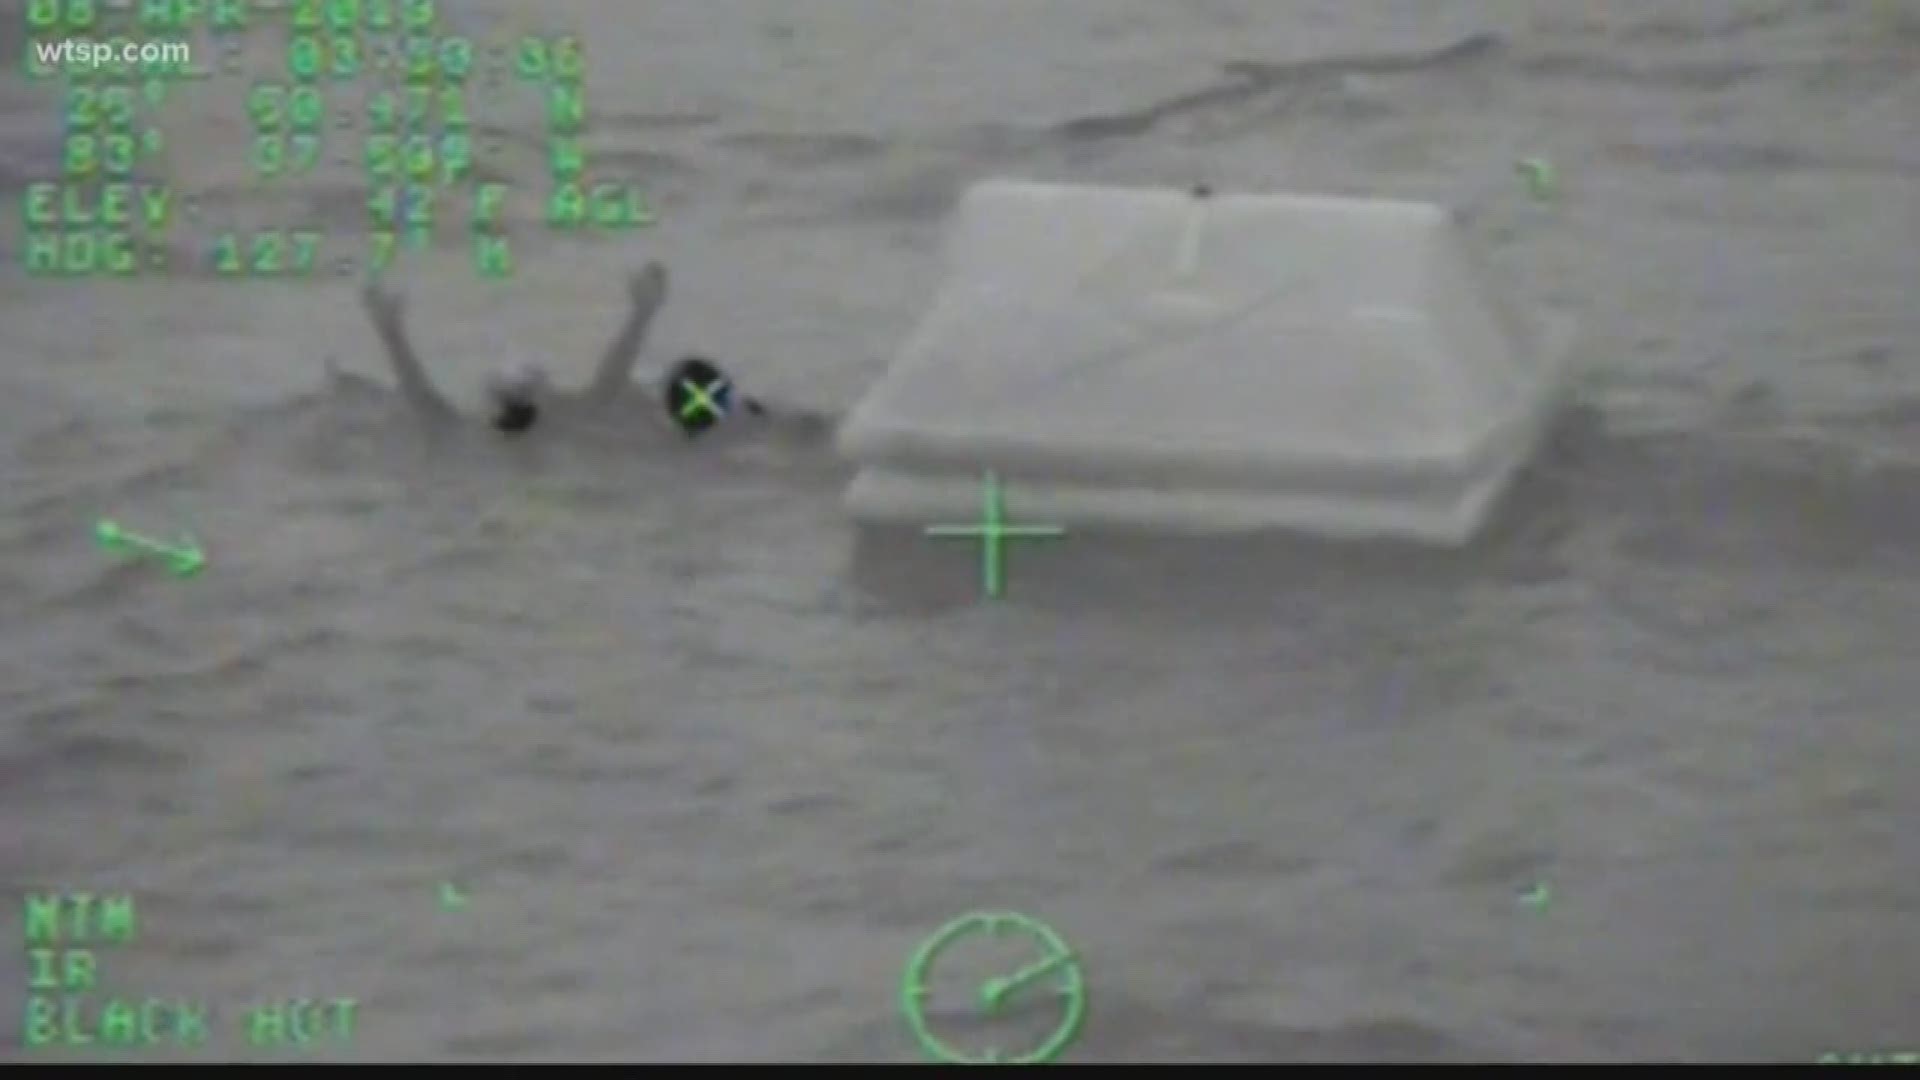 Three men were clinging to a life raft in the Gulf of Mexico for more than two hours before Coast Guard crews were able to rescue them.